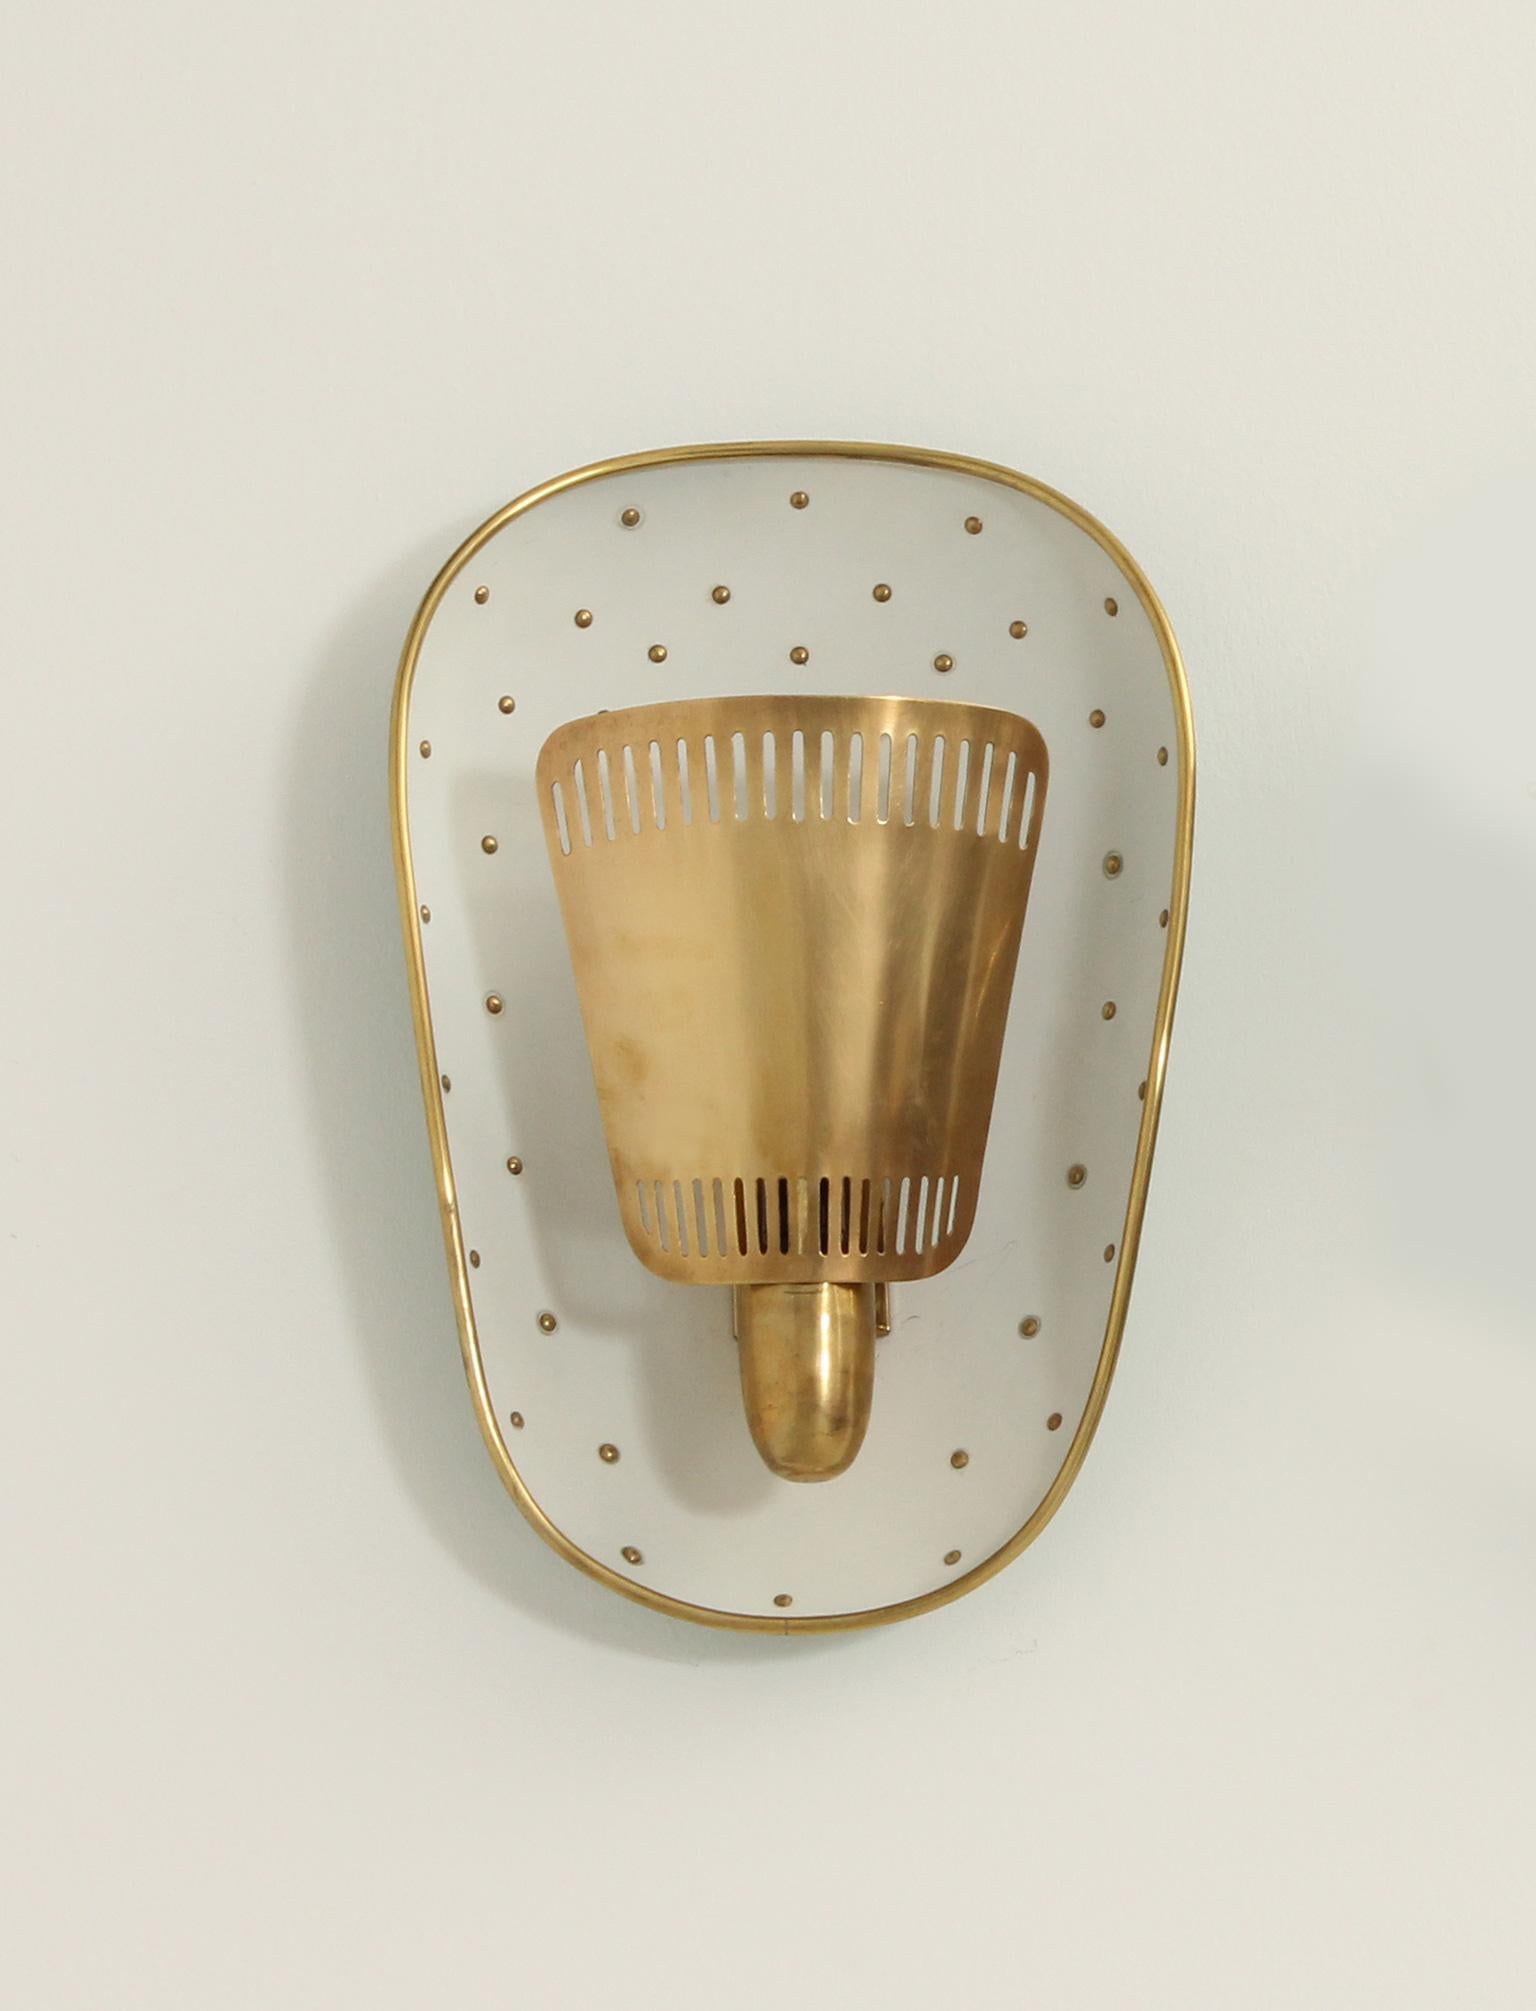 Large midcentury sconces attributed to Hillebrand, Germany, 1950s. Nice hand work in curved and lacquered metal with details and reflector in brass. 

Six units available, sold by pairs.